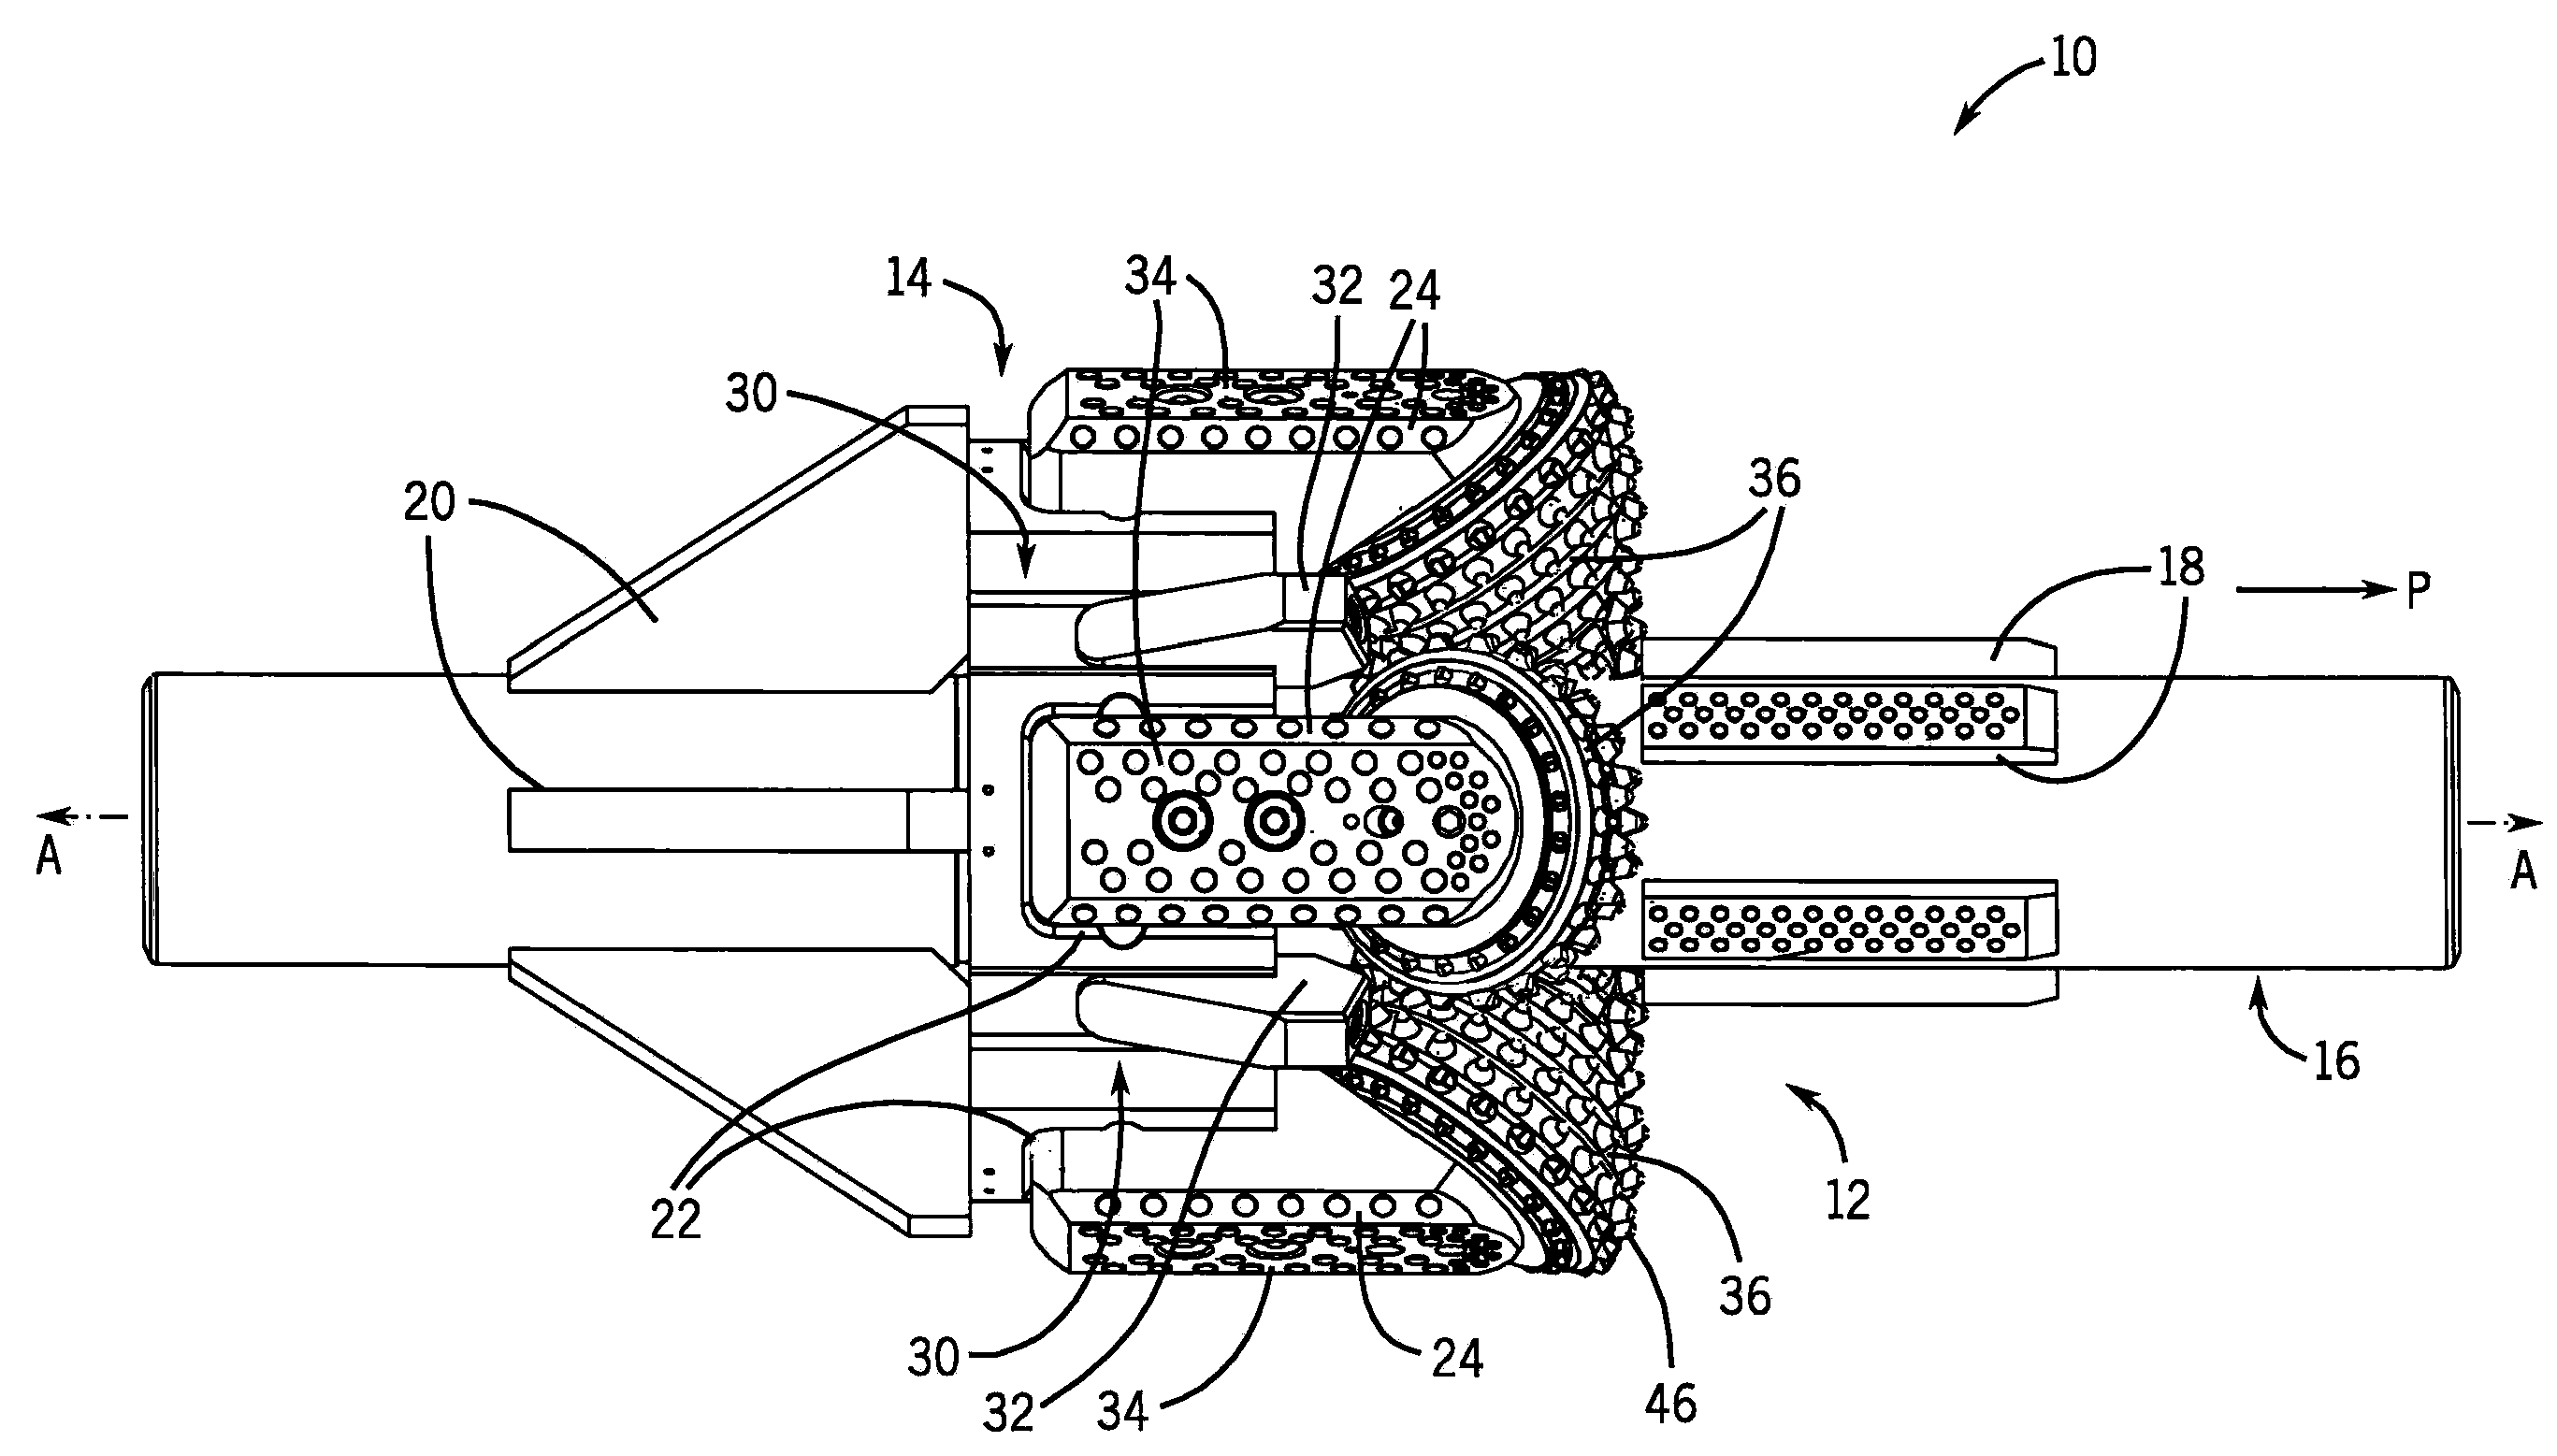 Hole opener assembly and a cone arm forming a part thereof